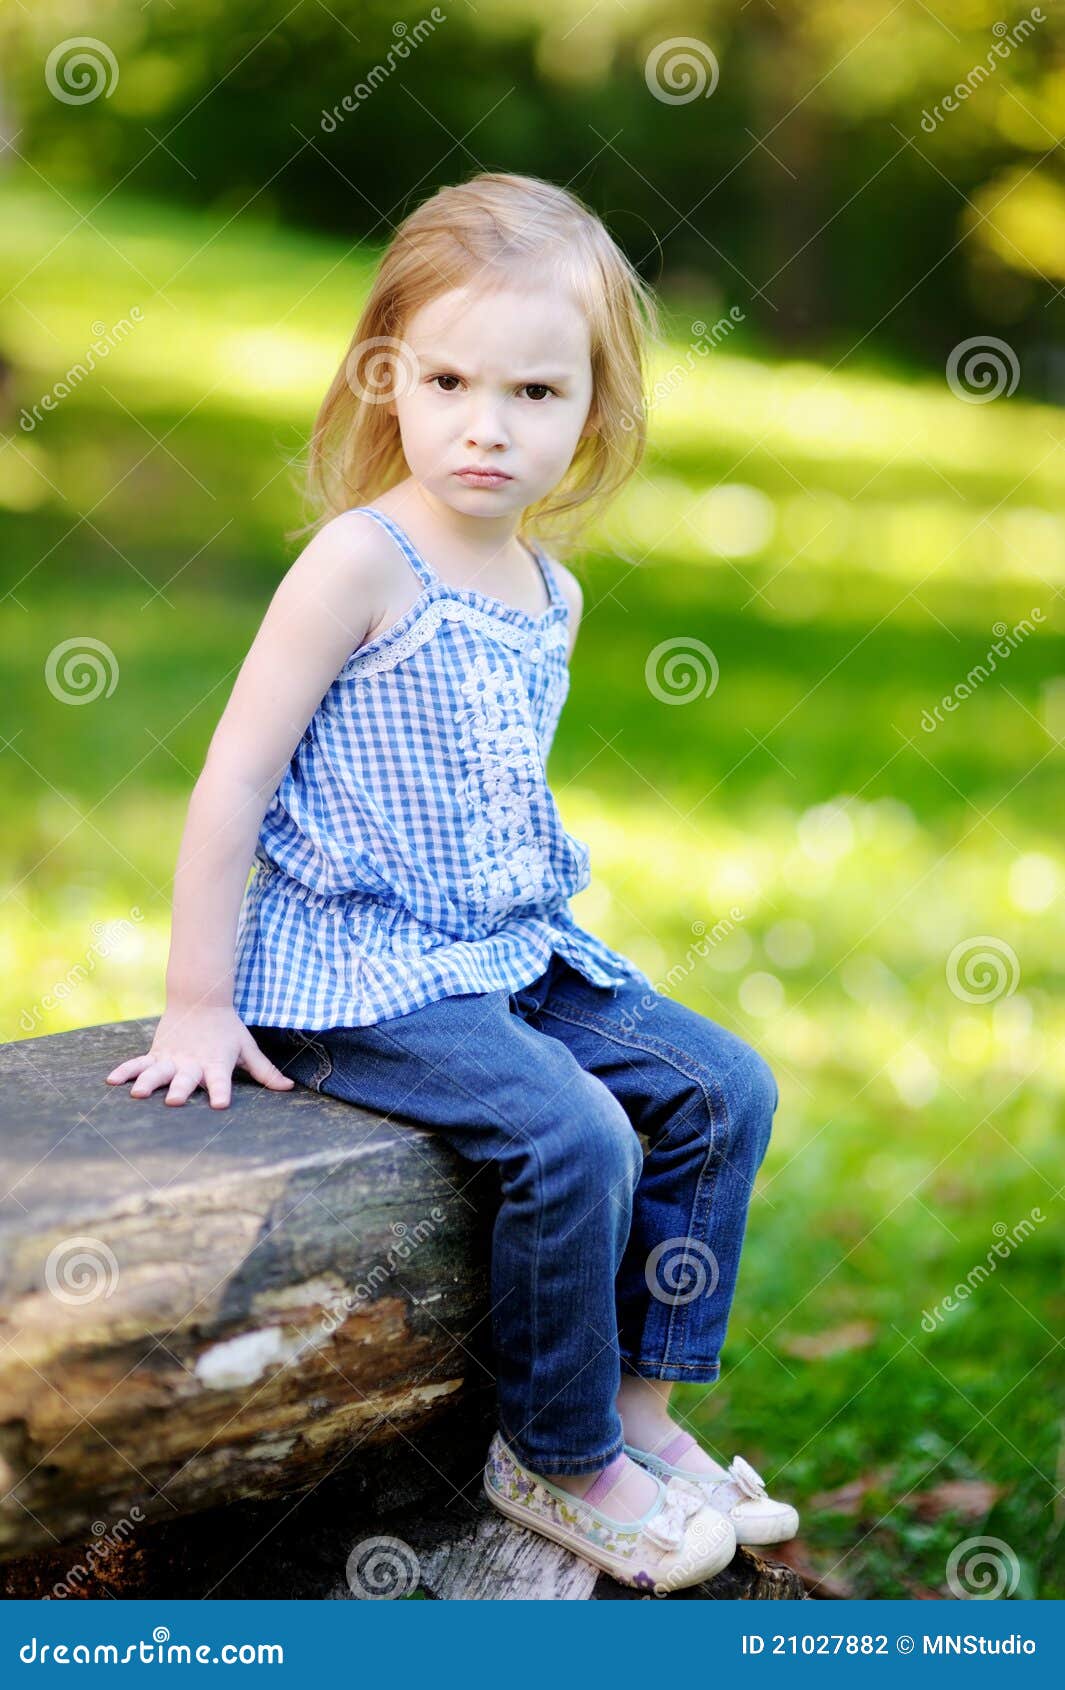 Angry little girl portrait stock photo. Image of dissapointed - 21027882